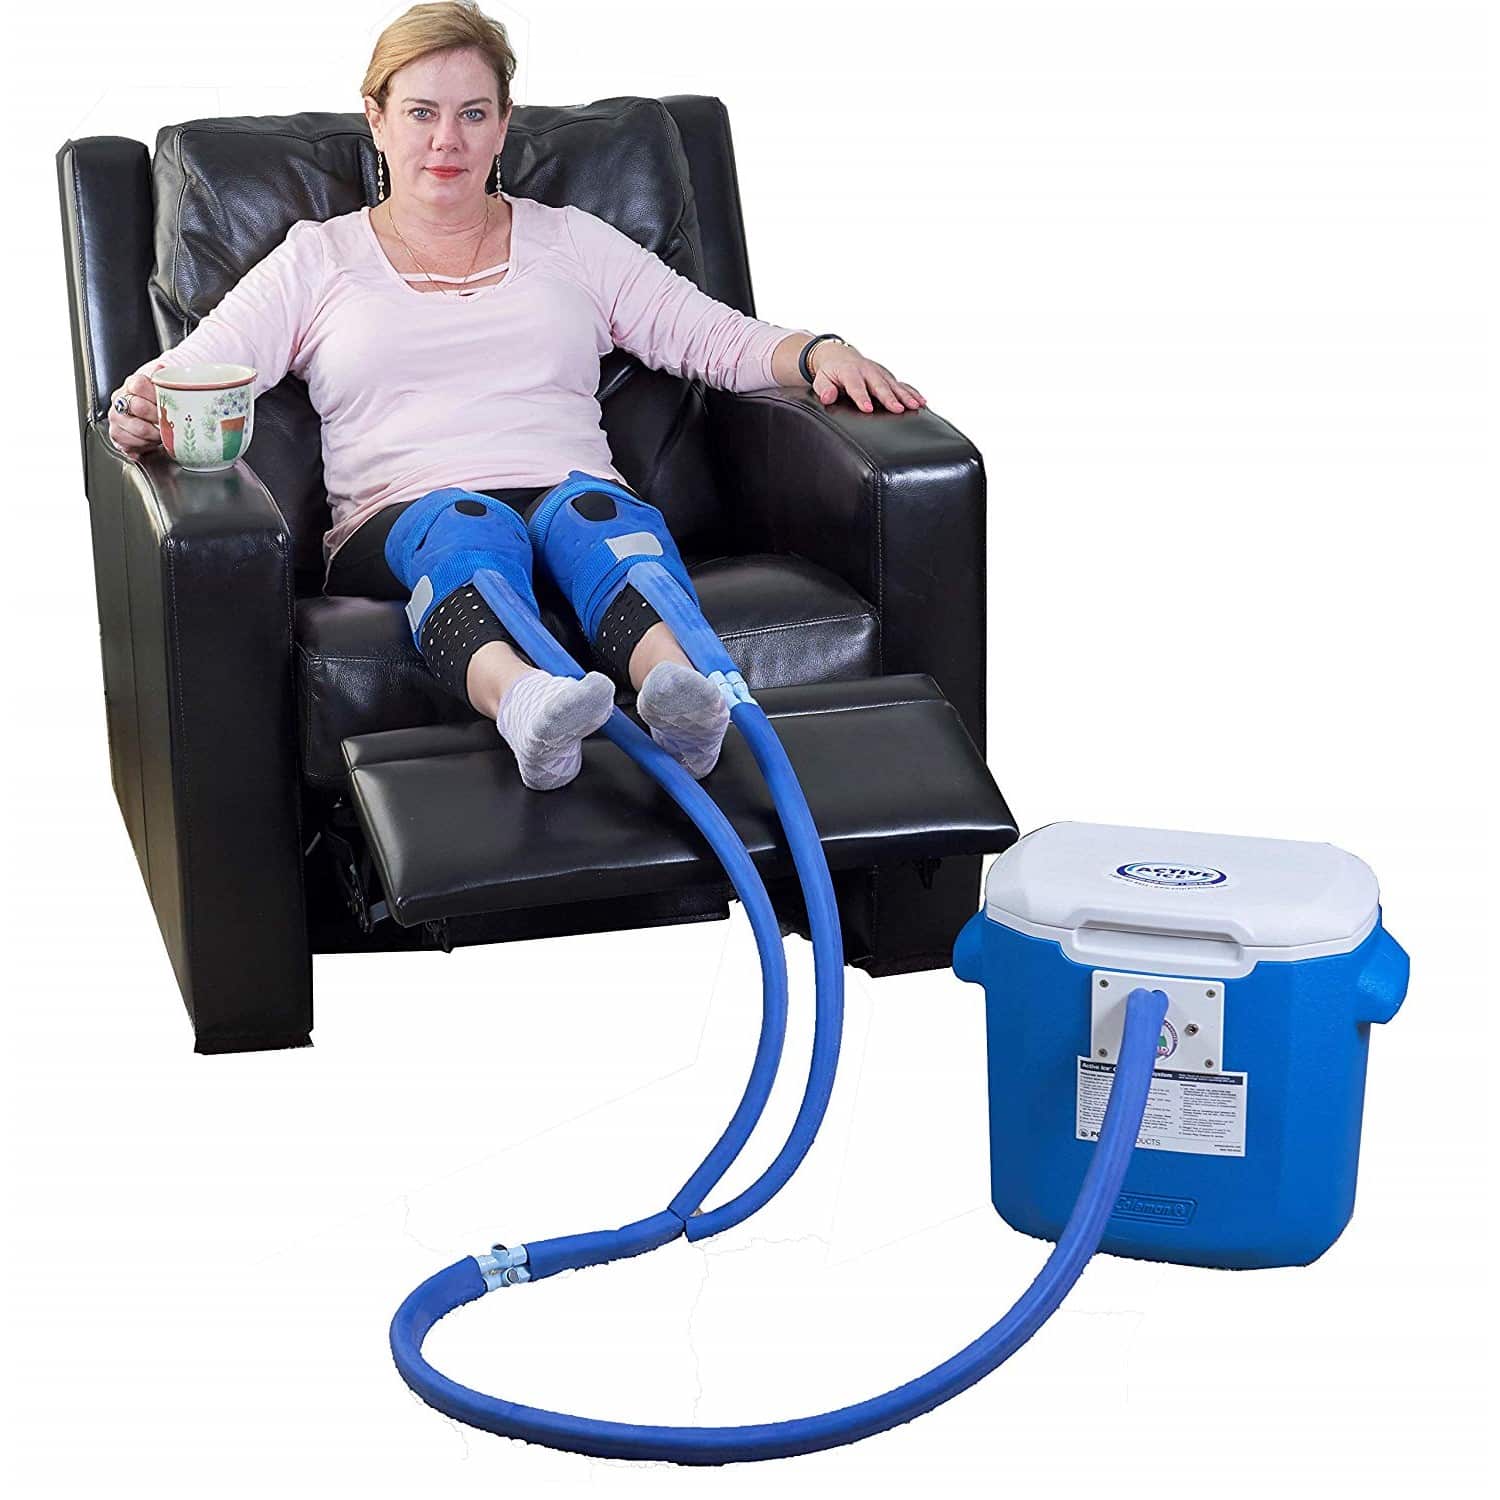 Medline Medcline Cold Therapy Machine